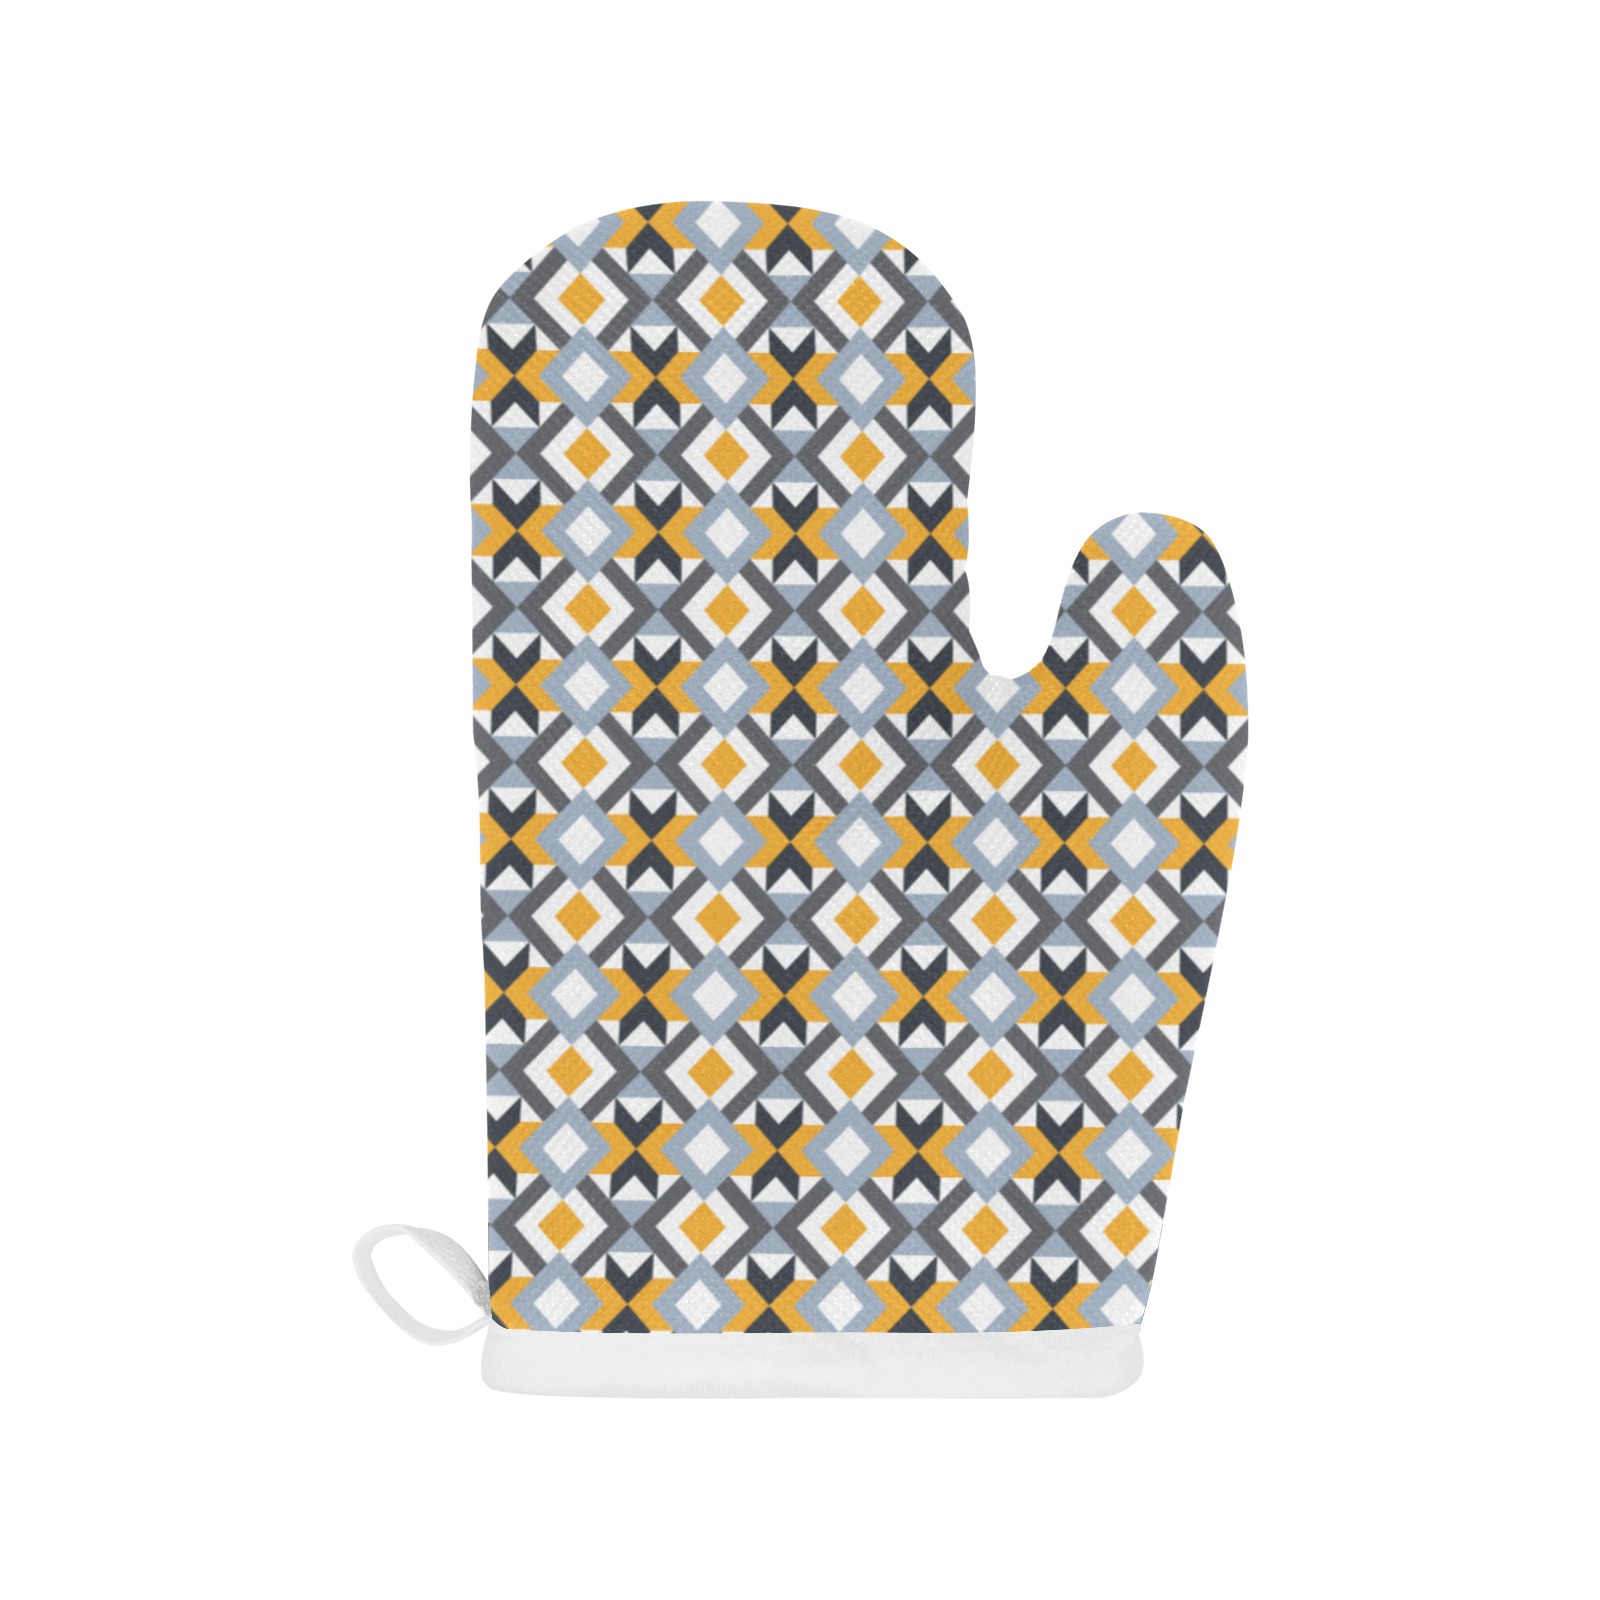 Retro Angles Abstract Geometric Pattern Linen Oven Mitt (Two Pieces)